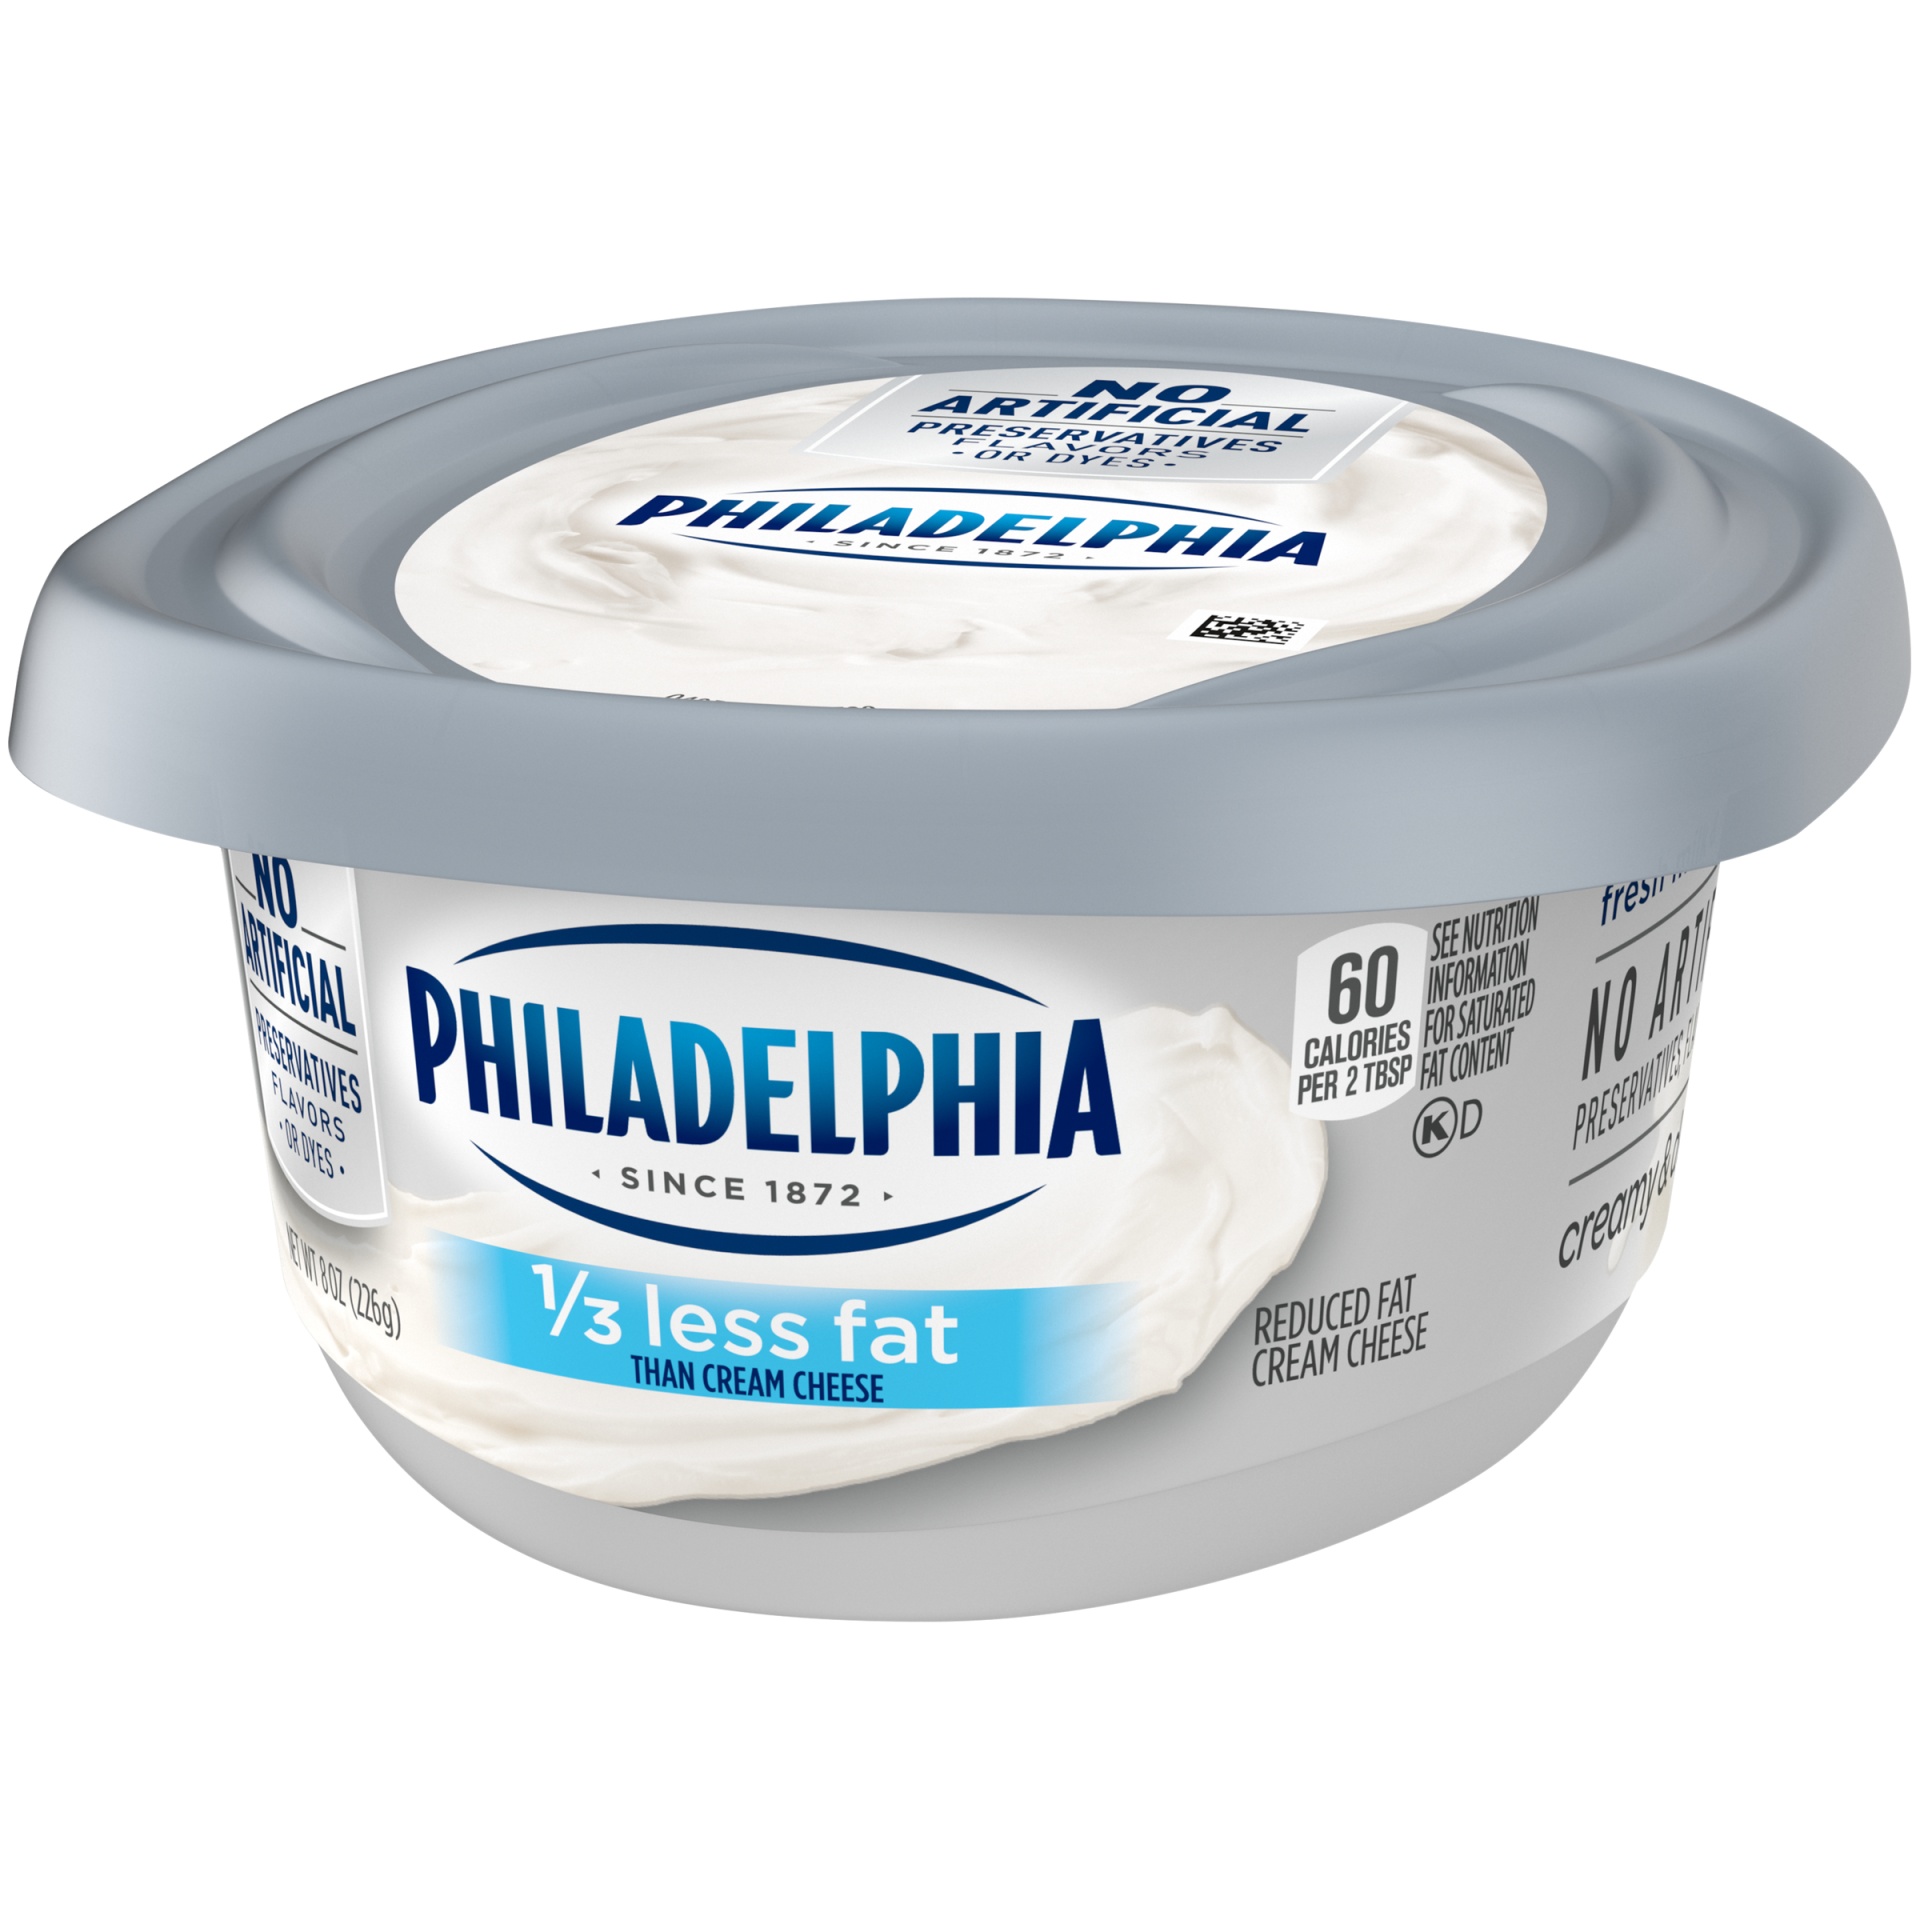 slide 9 of 12, Philadelphia Reduced Fat Cream Cheese Spread with 1/3 Less Fat, 8 oz